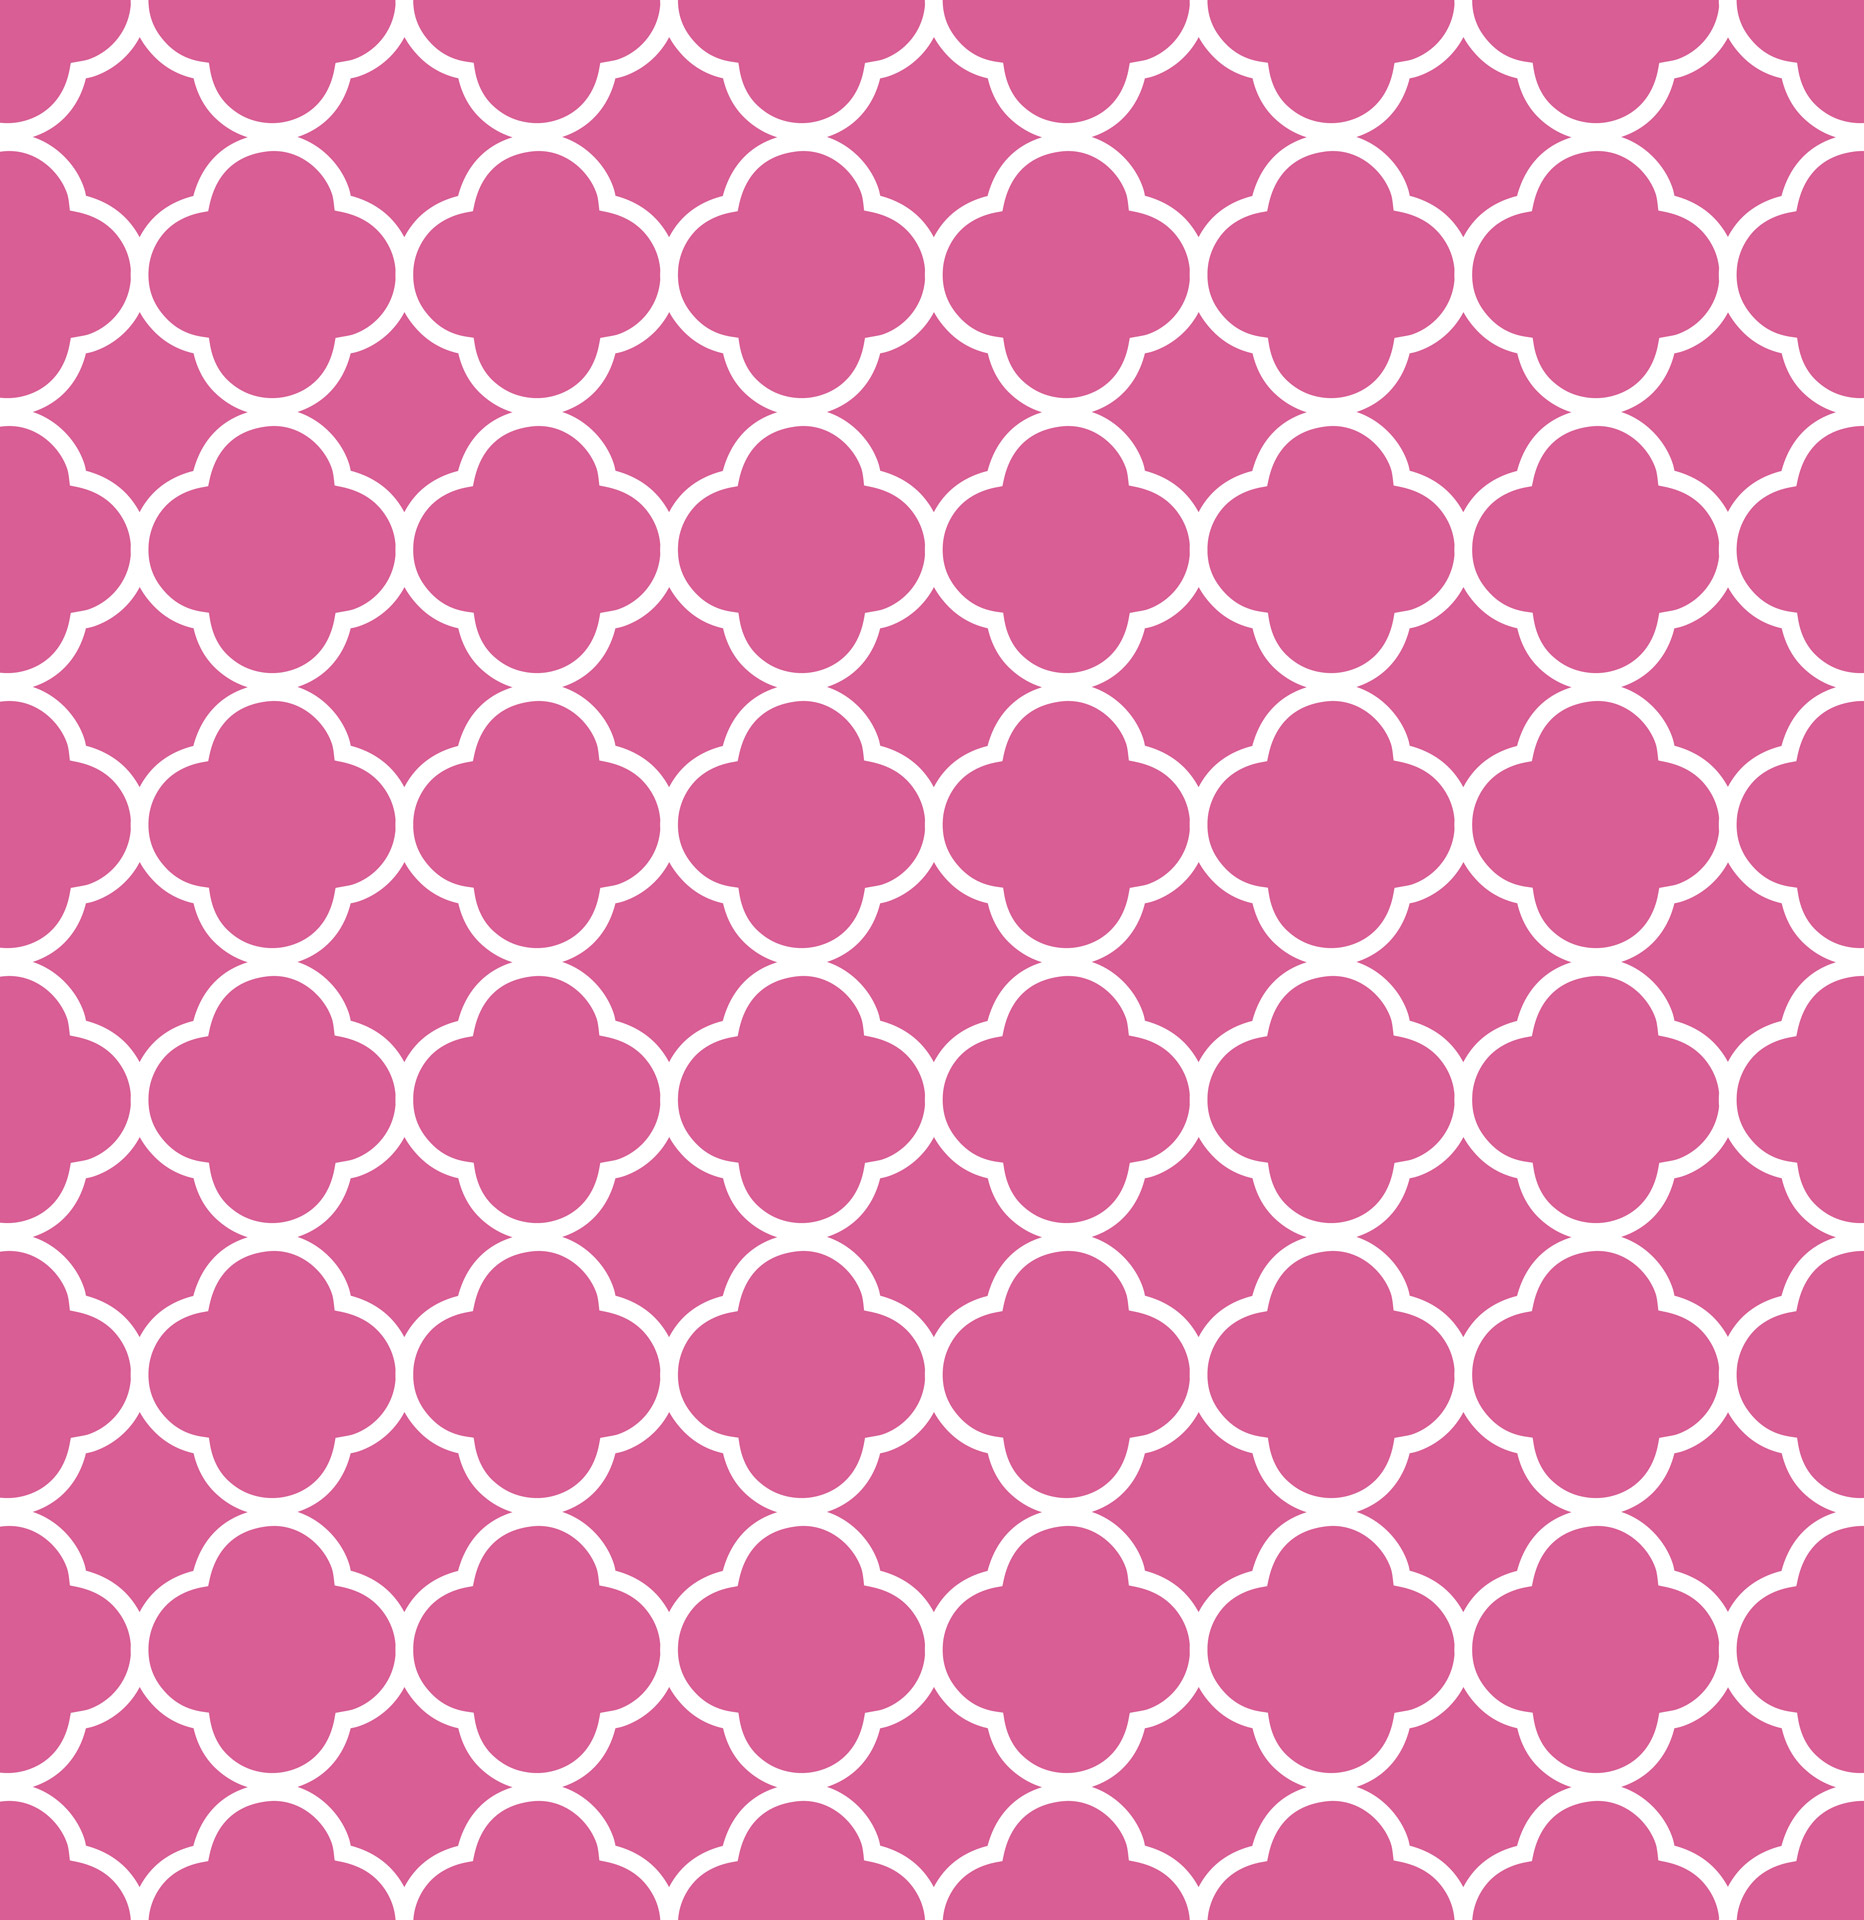 Quatrefoil,pattern,background,wallpaper,pink - free image from 